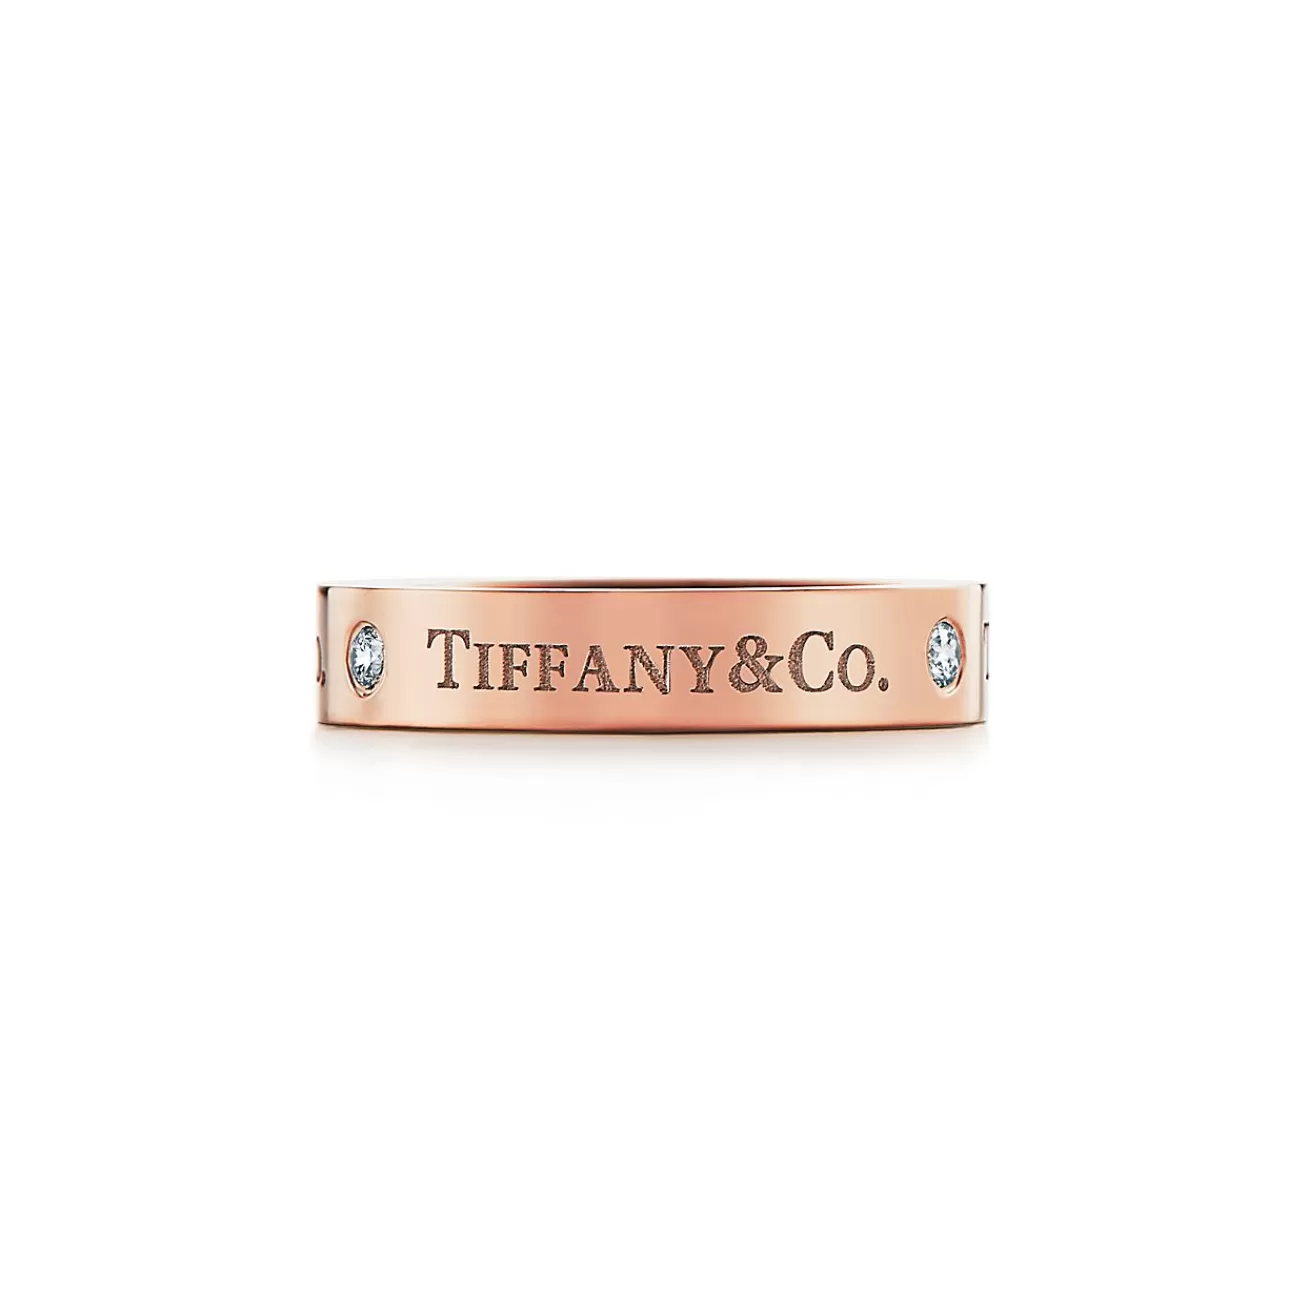 Tiffany & Co. T&CO.® band ring in 18k rose gold with diamonds, 4 mm. | ^Women Rings | Rose Gold Jewelry